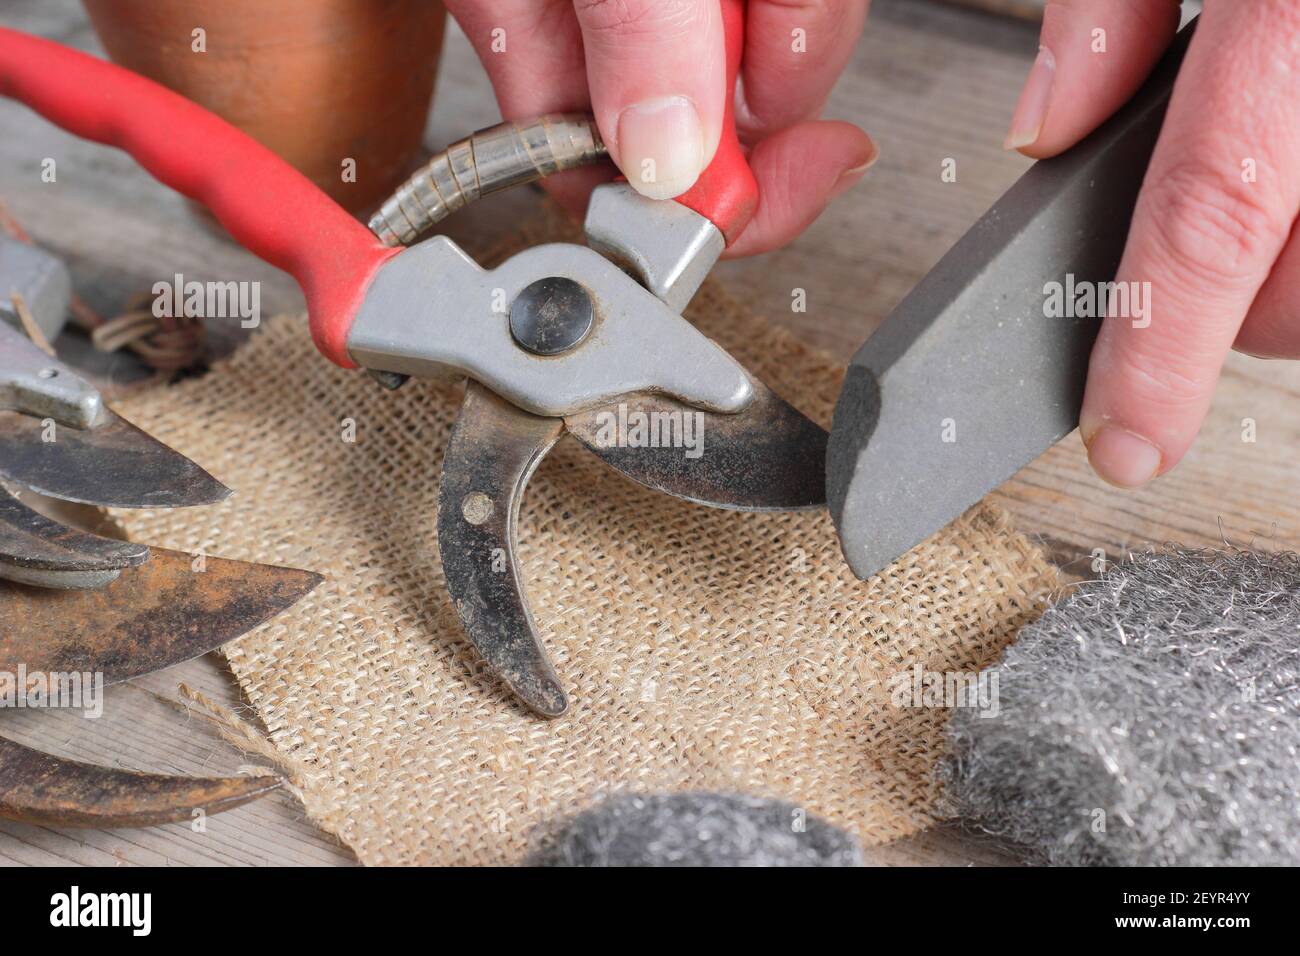 Sharpening the blunt blade of secateurs with a sharpening stone. UK Stock Photo